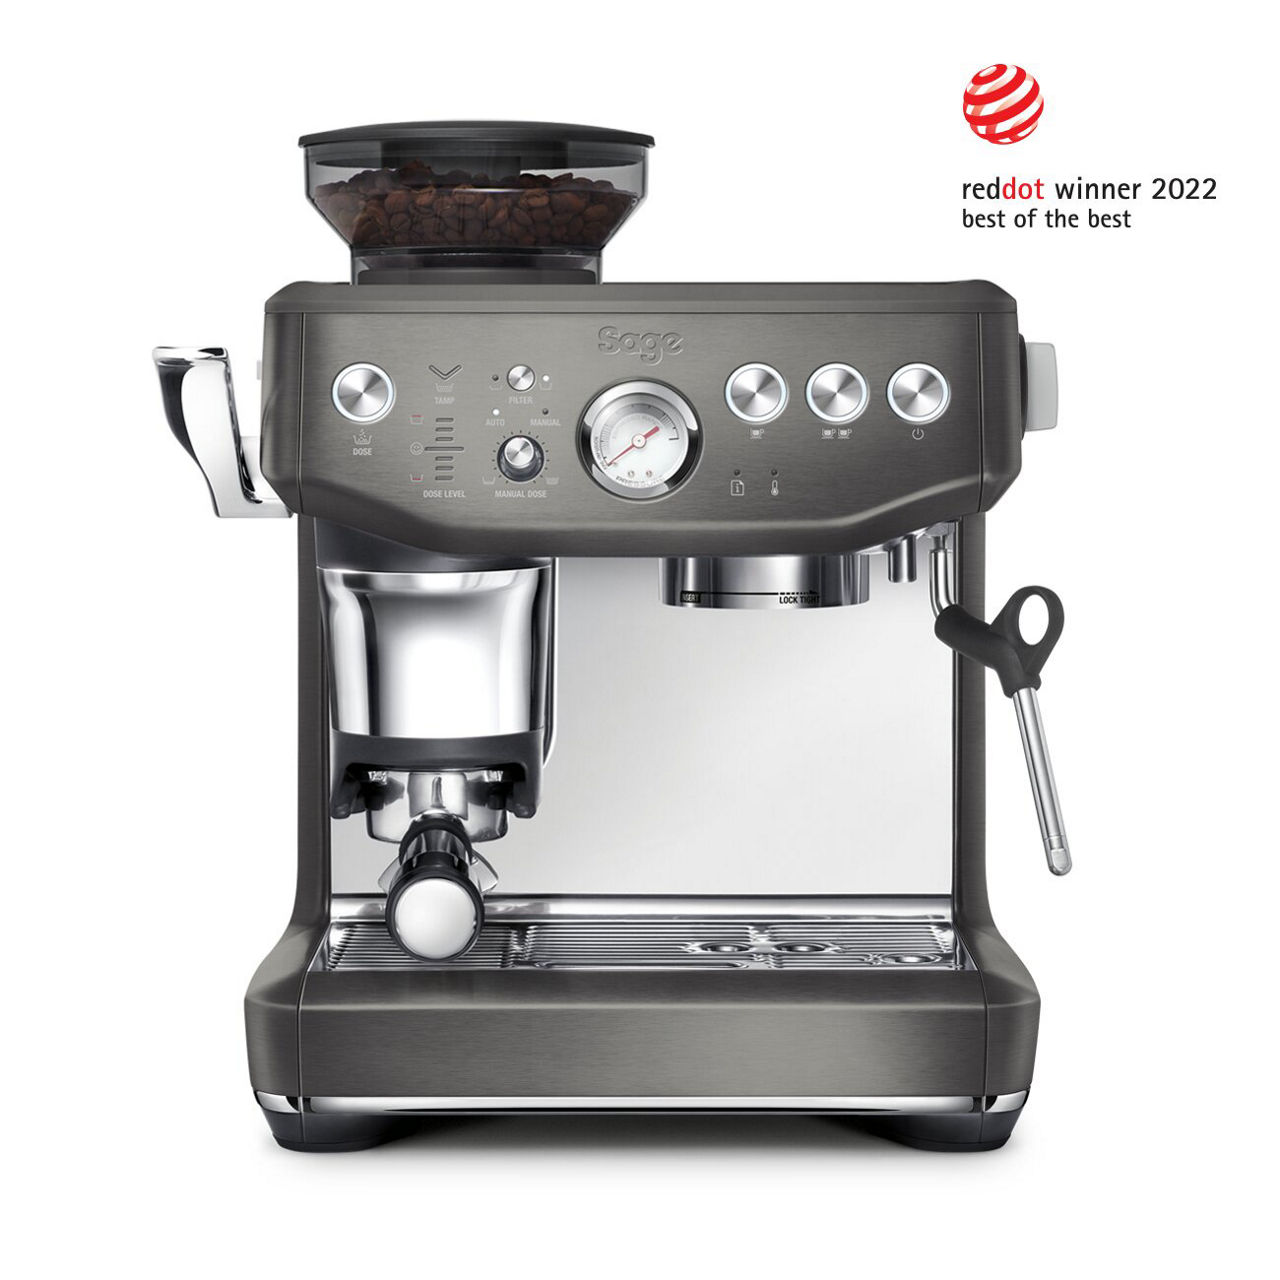 the Barista Express Impress in Black Stainless Steel